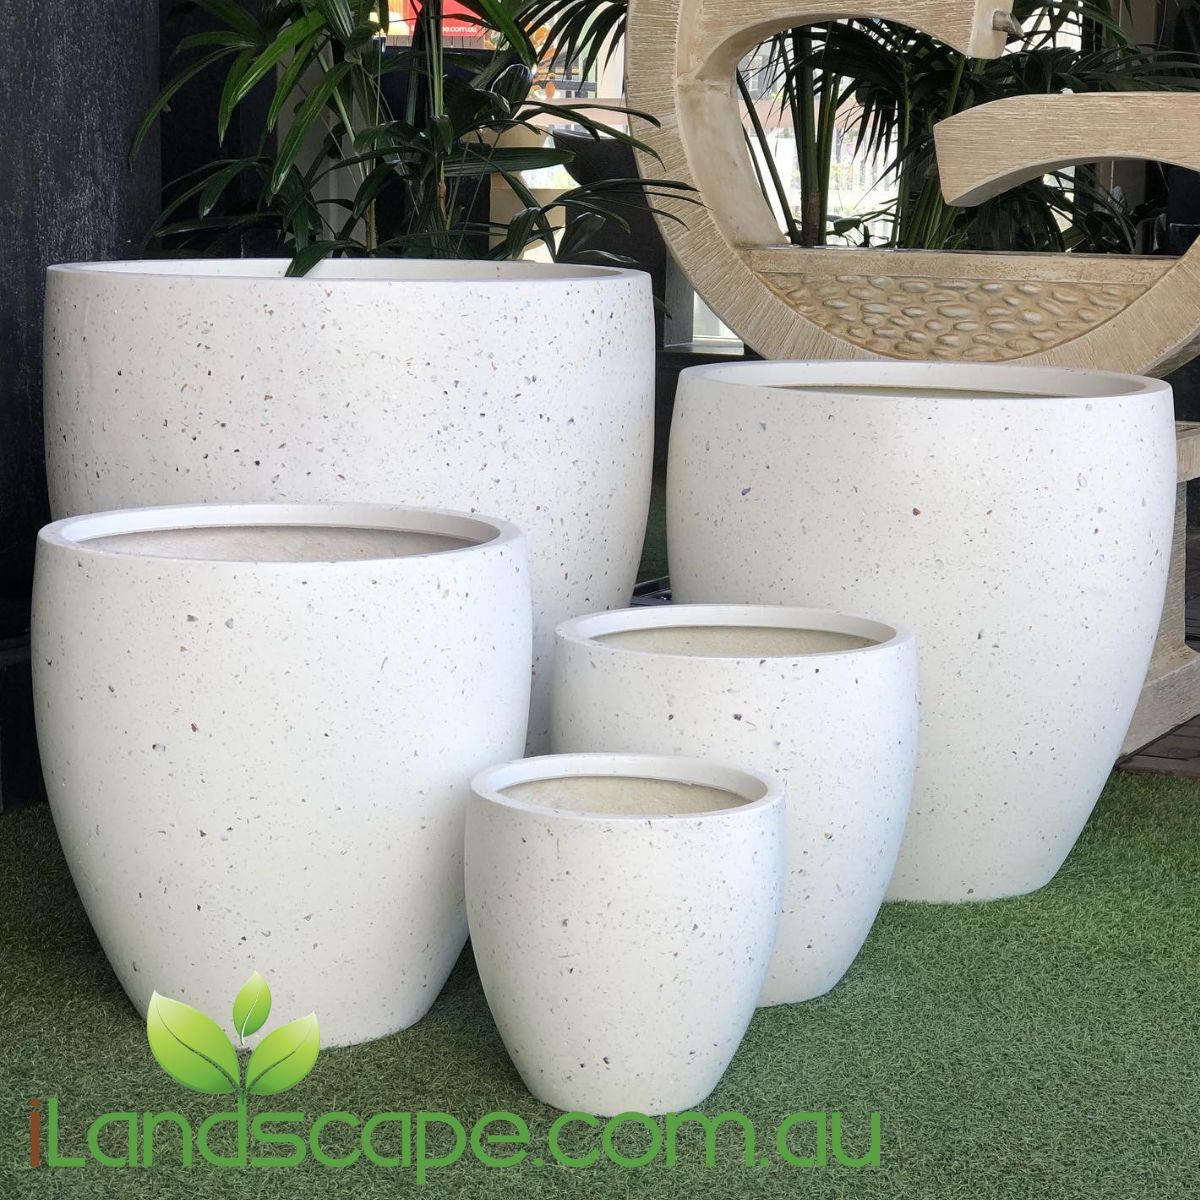 Modstone Montague Egg Pot is a designer range of strong, durable lightweight planters with a stylish terrazzo appearance. Modstone Pots are made using a similar production process to our Urbanlite range, but also contain a coarse stone grit exterior layer which can be treated to produce a variety of attractive polished and rough finishes